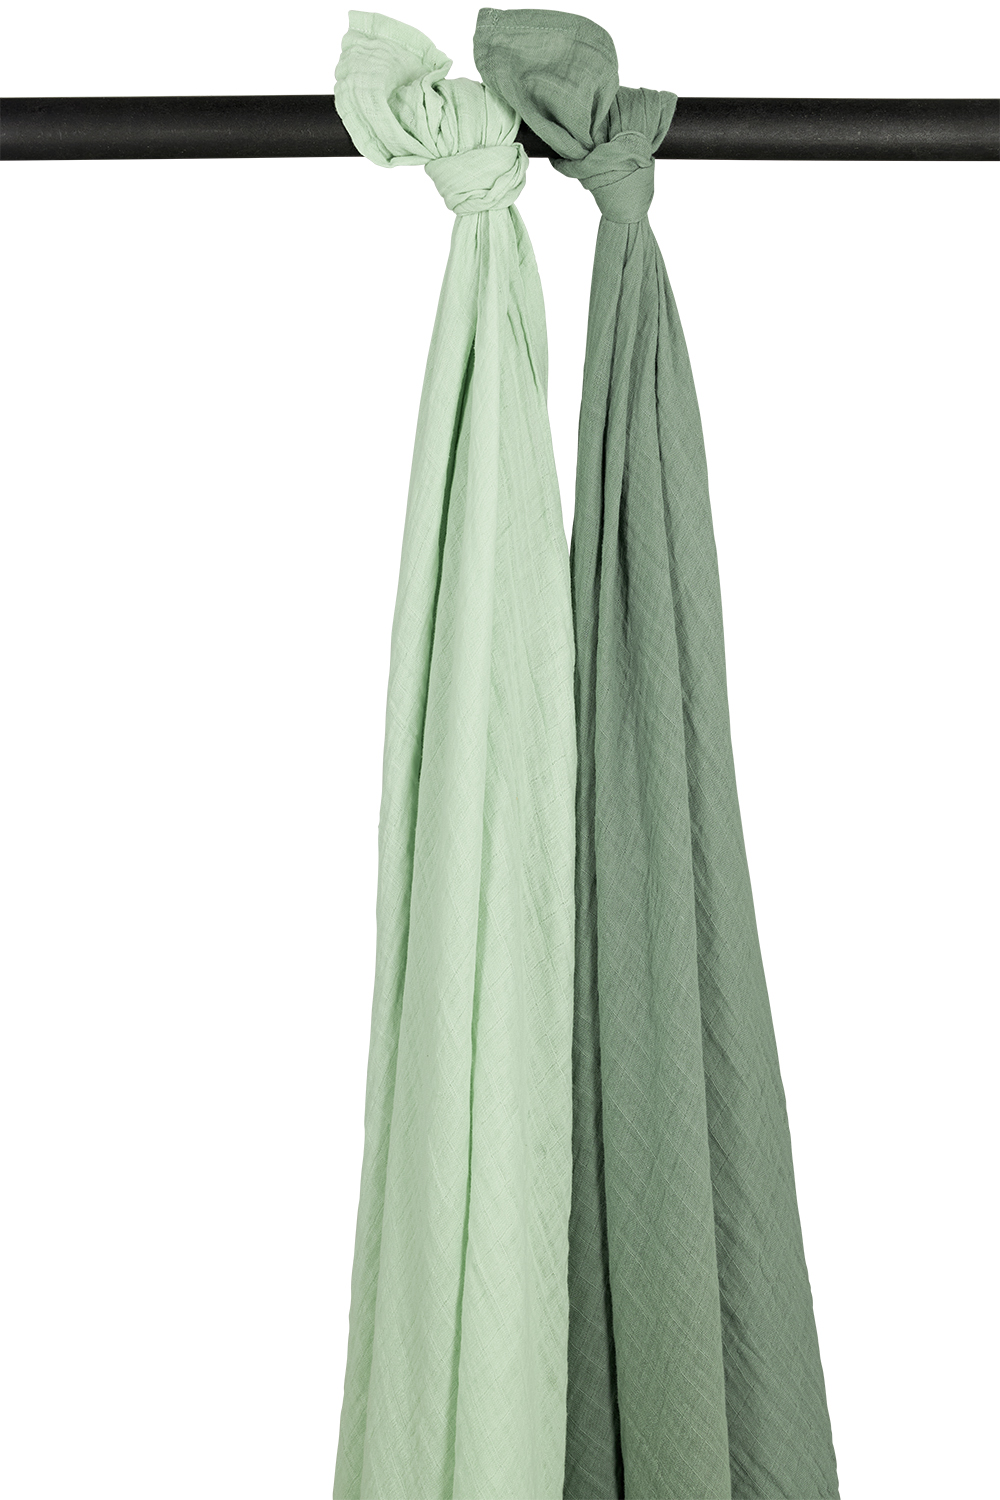 Swaddle 2-pack muslin Uni - soft green/forest green - 120x120cm